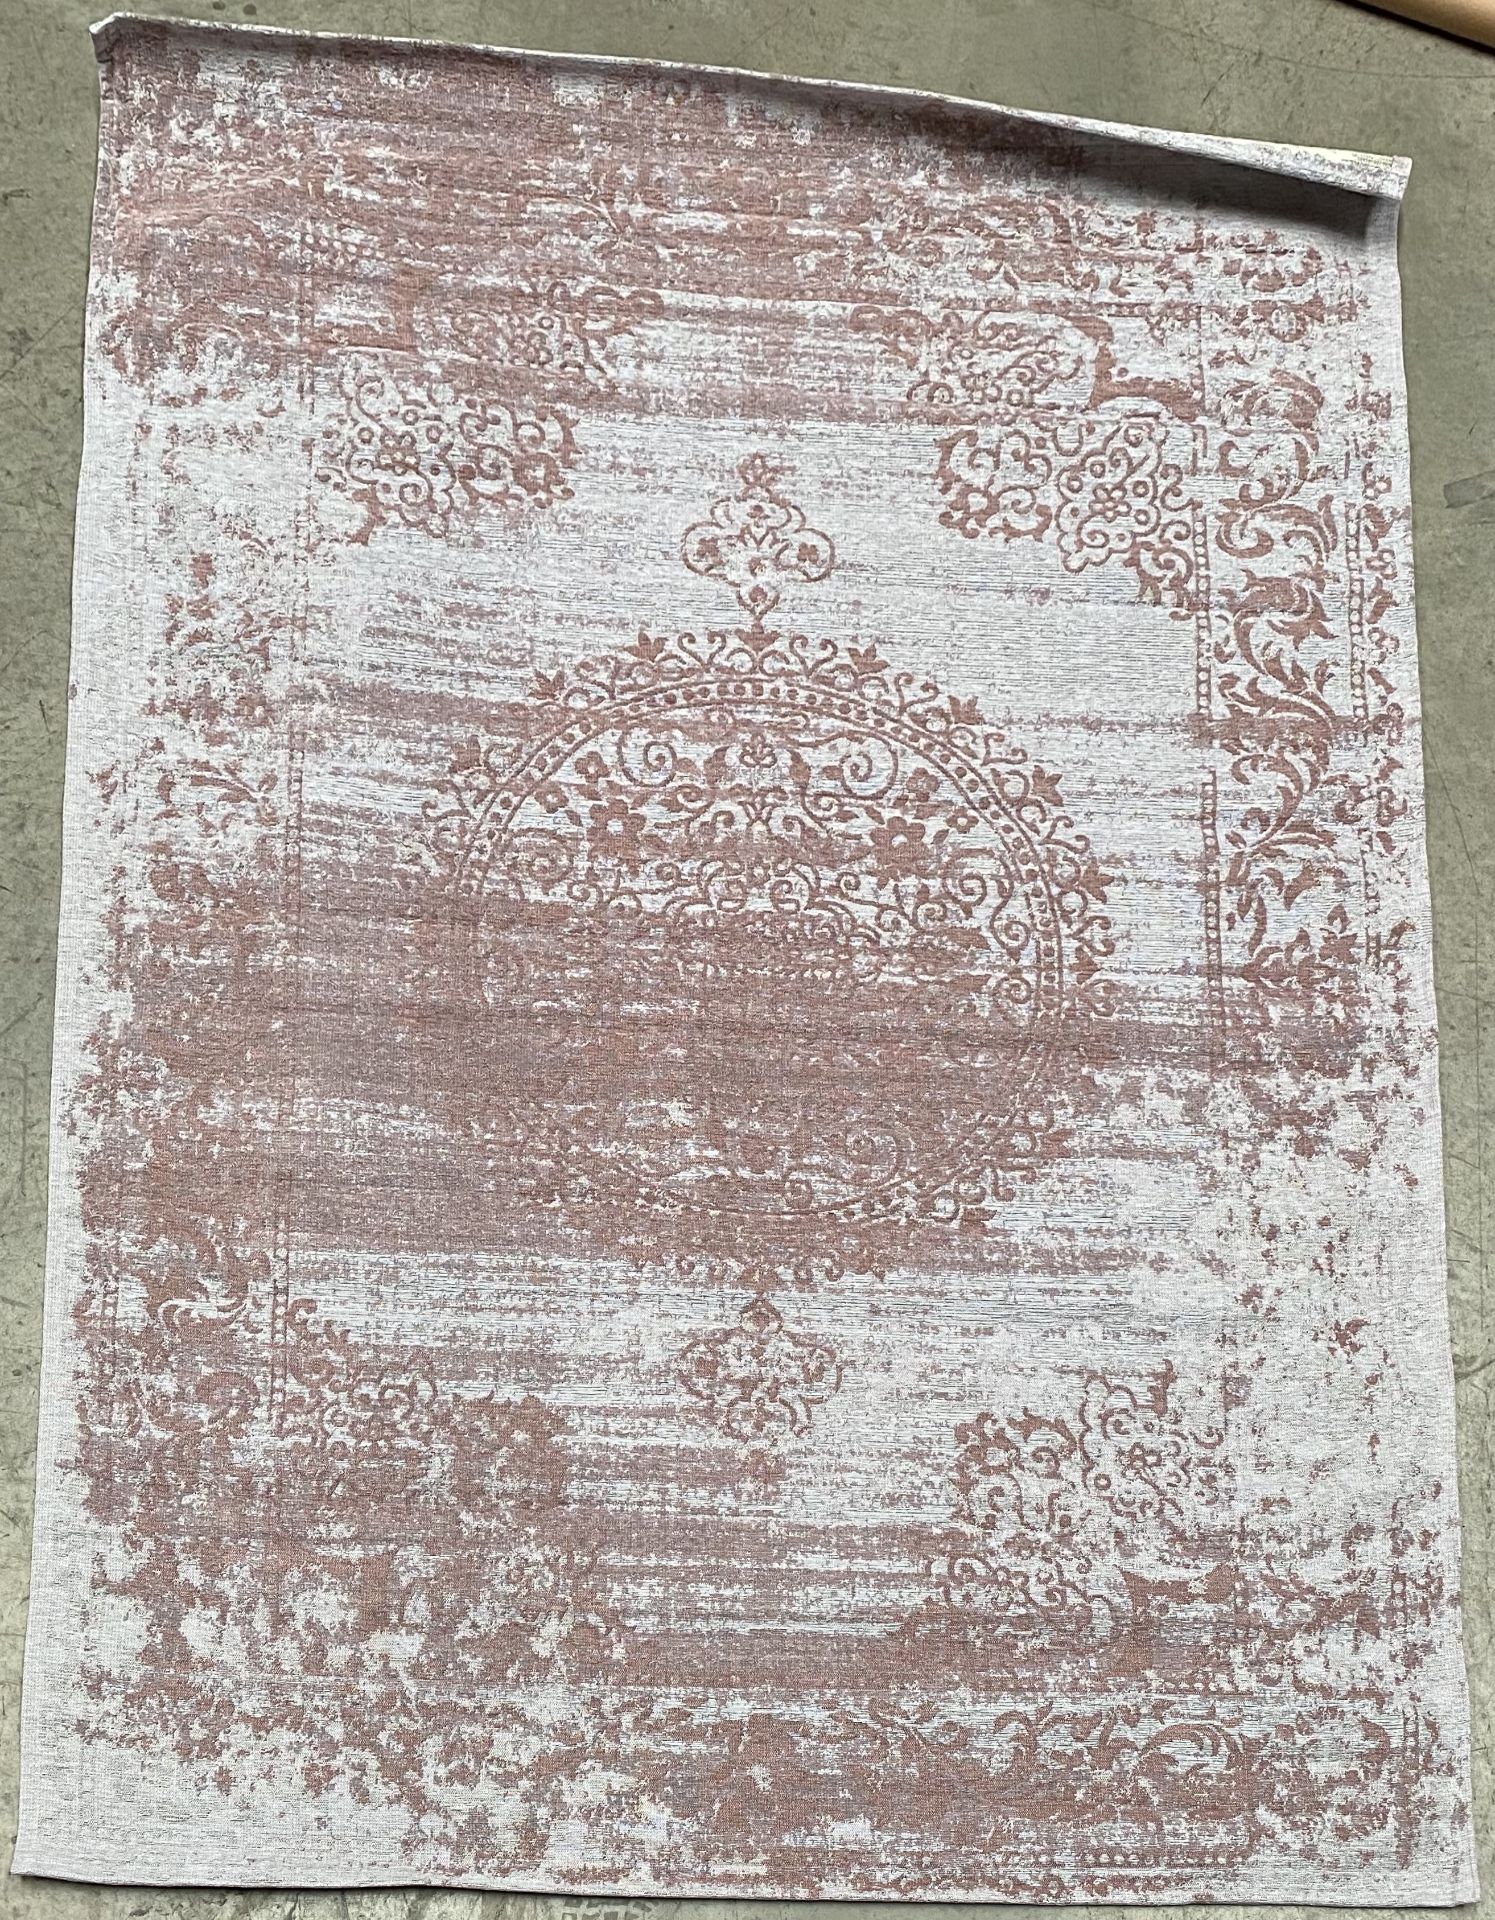 A Carina Collection pink and white rug - 160cm x 230cm